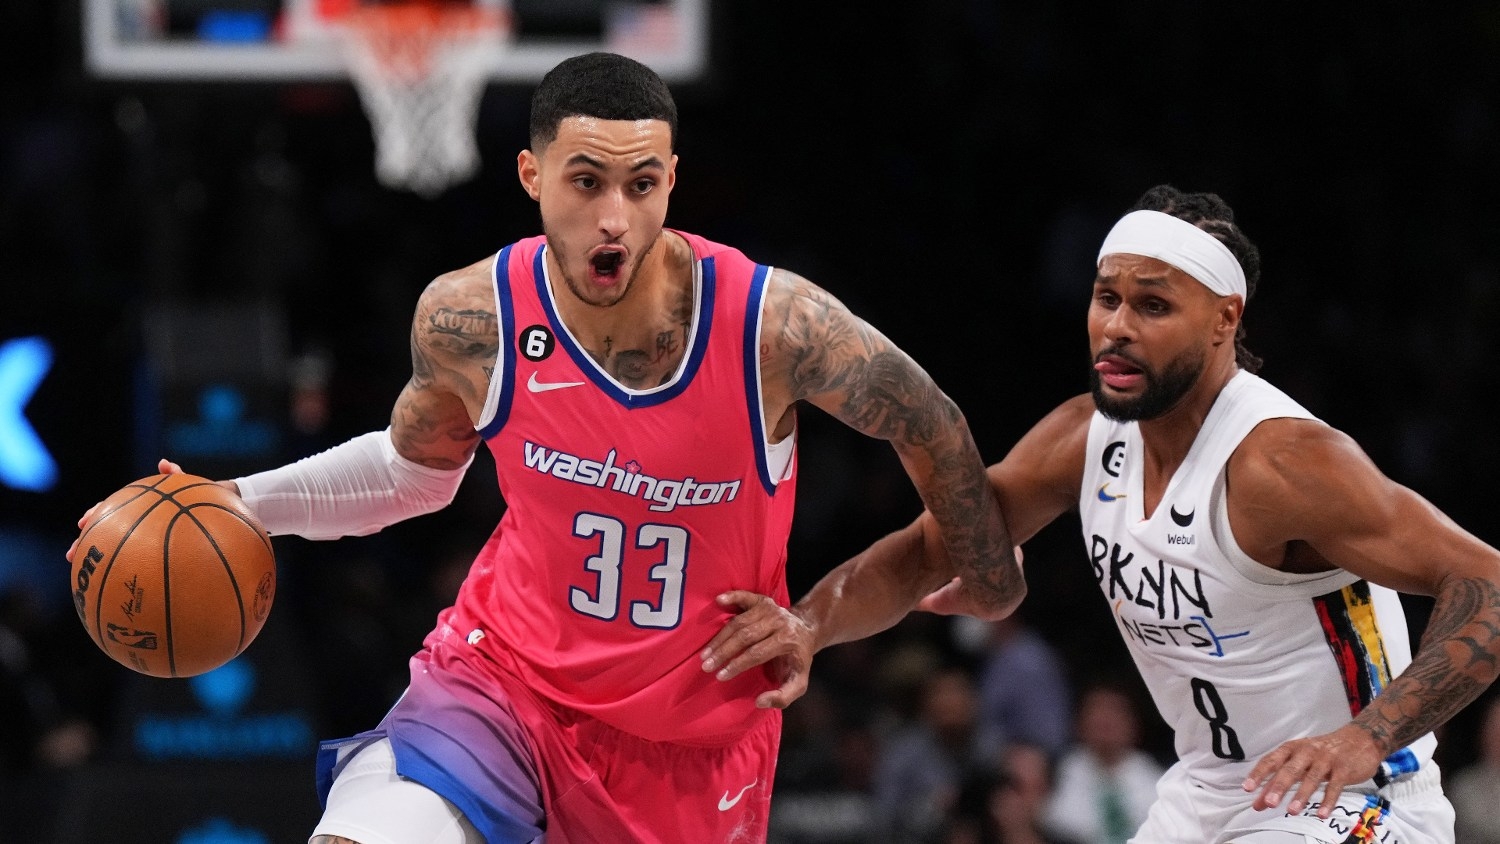 Kyle Kuzma #33 of the Washington Wizards drives to the basket during the first half against the Brooklyn Nets at Barclays Center on 4 February 2023 in New York City.